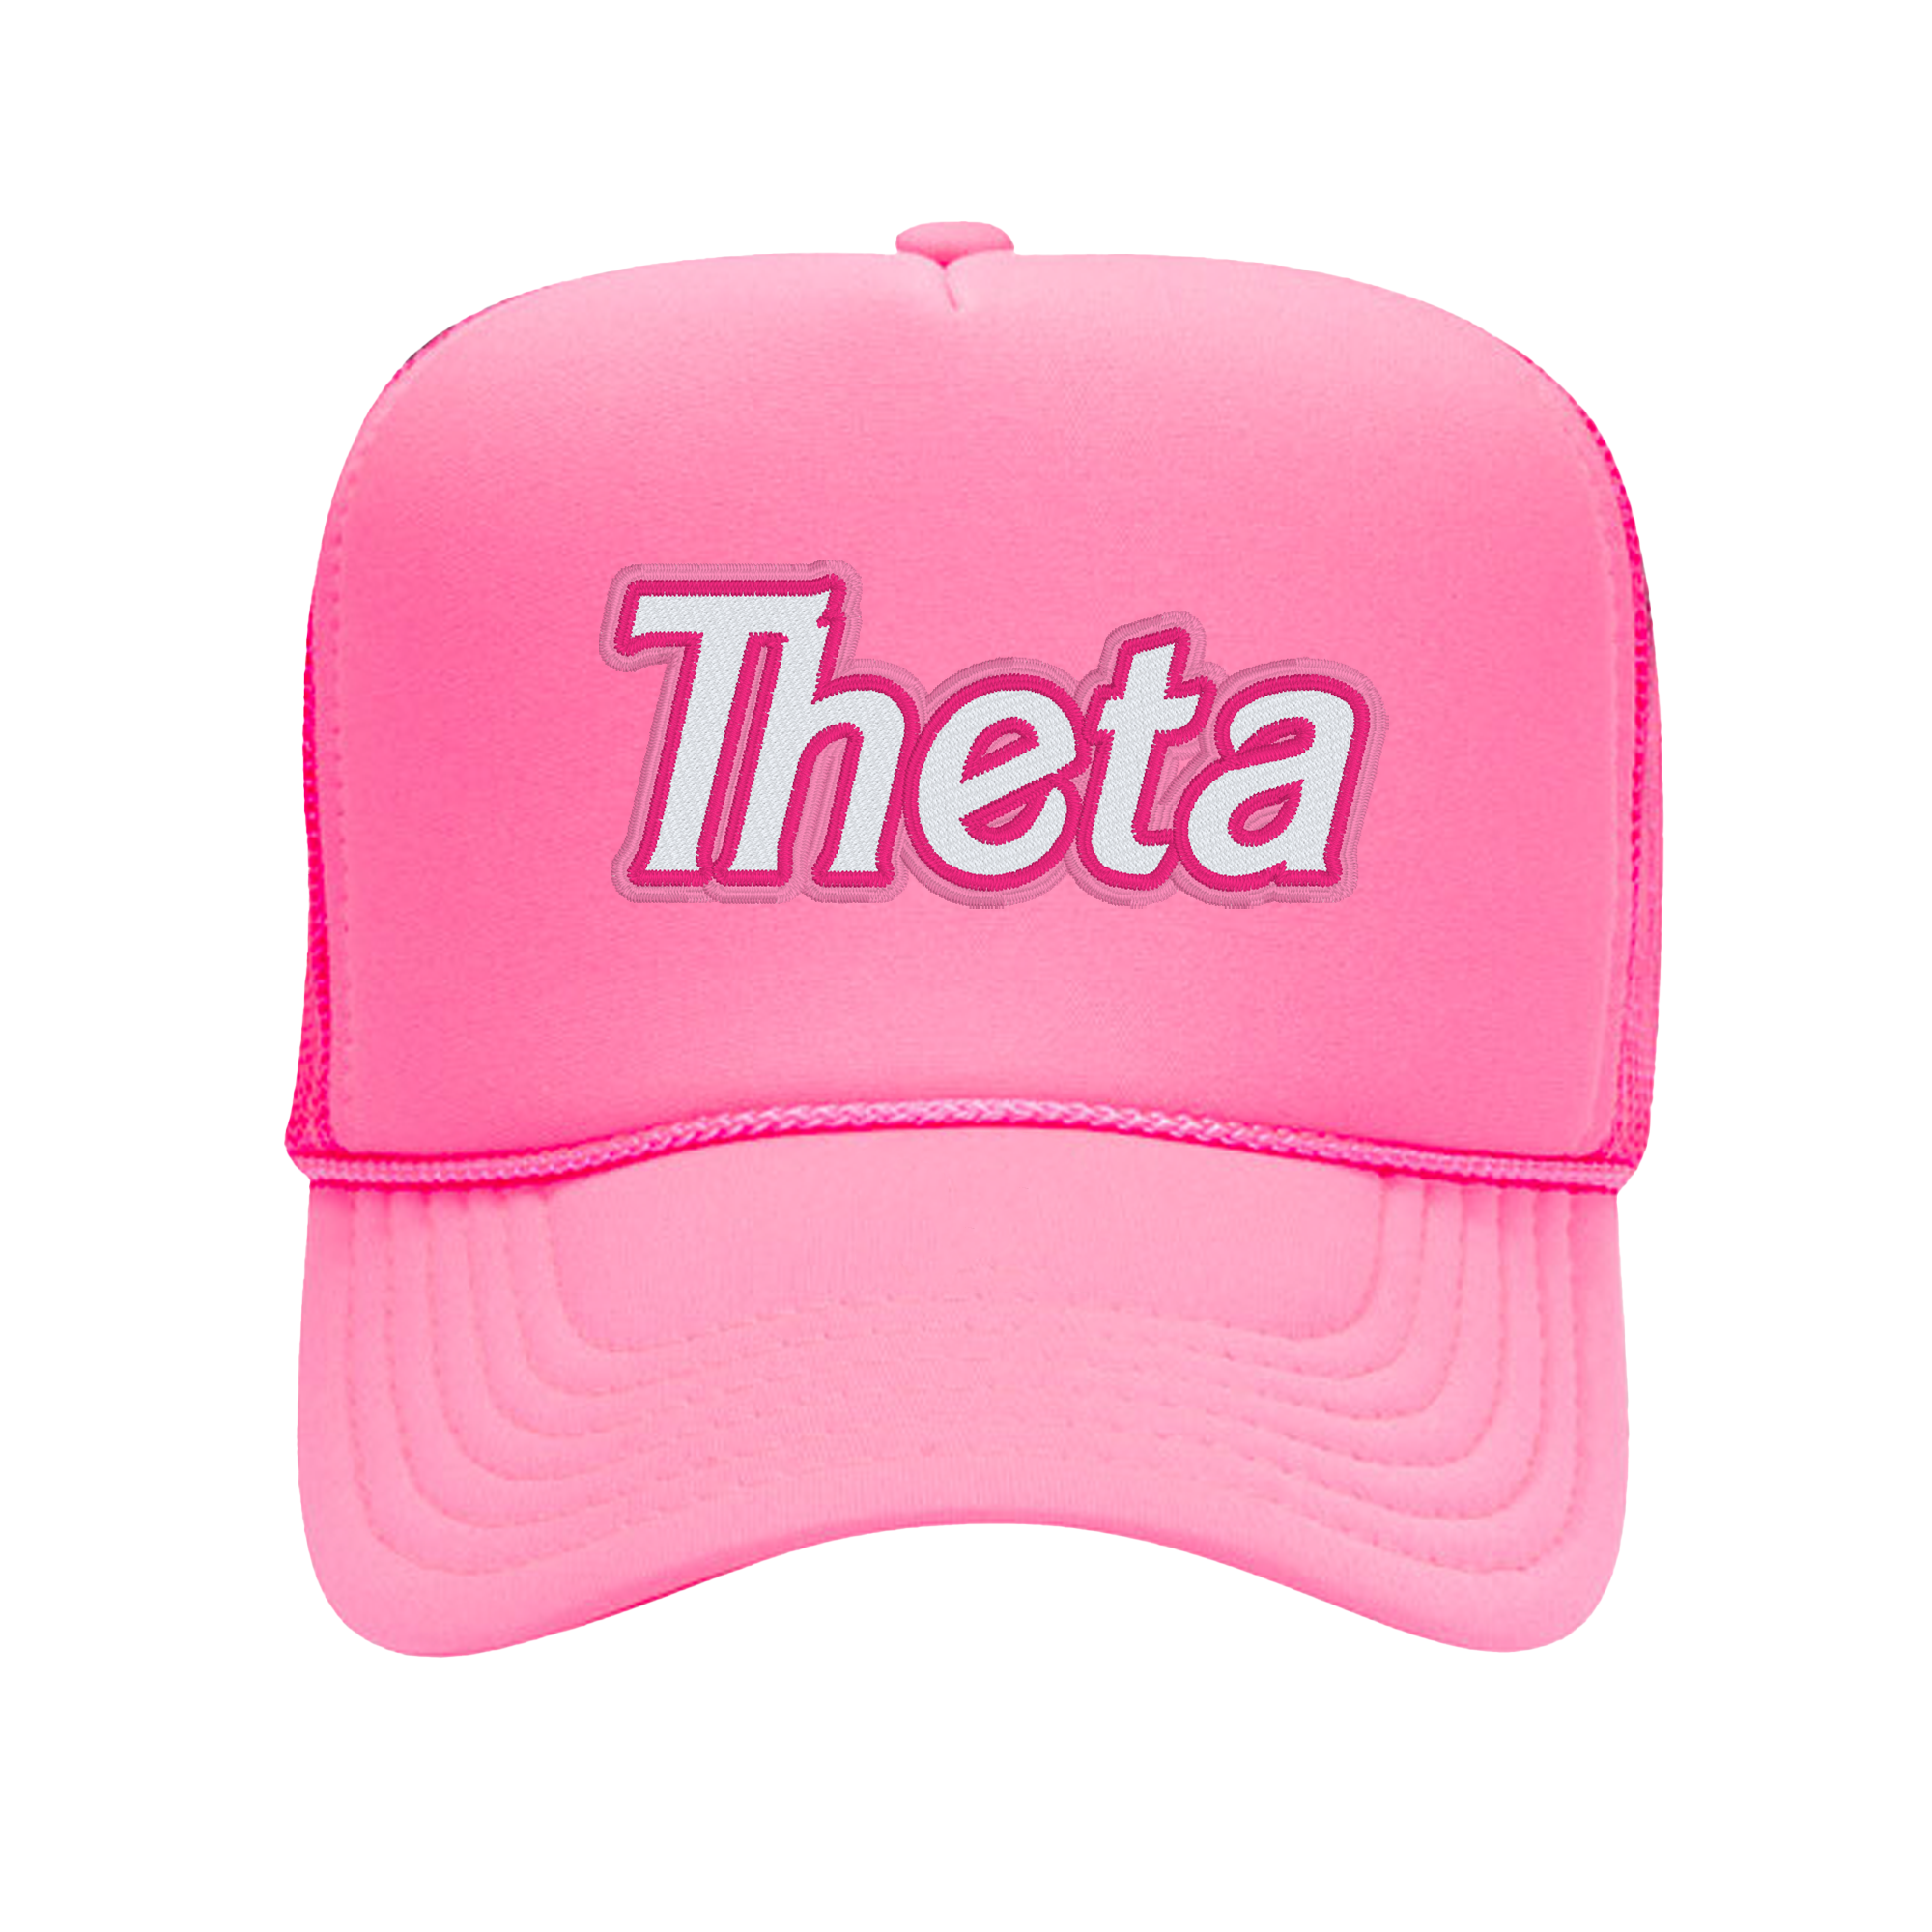 a pink hat with the word theta printed on it